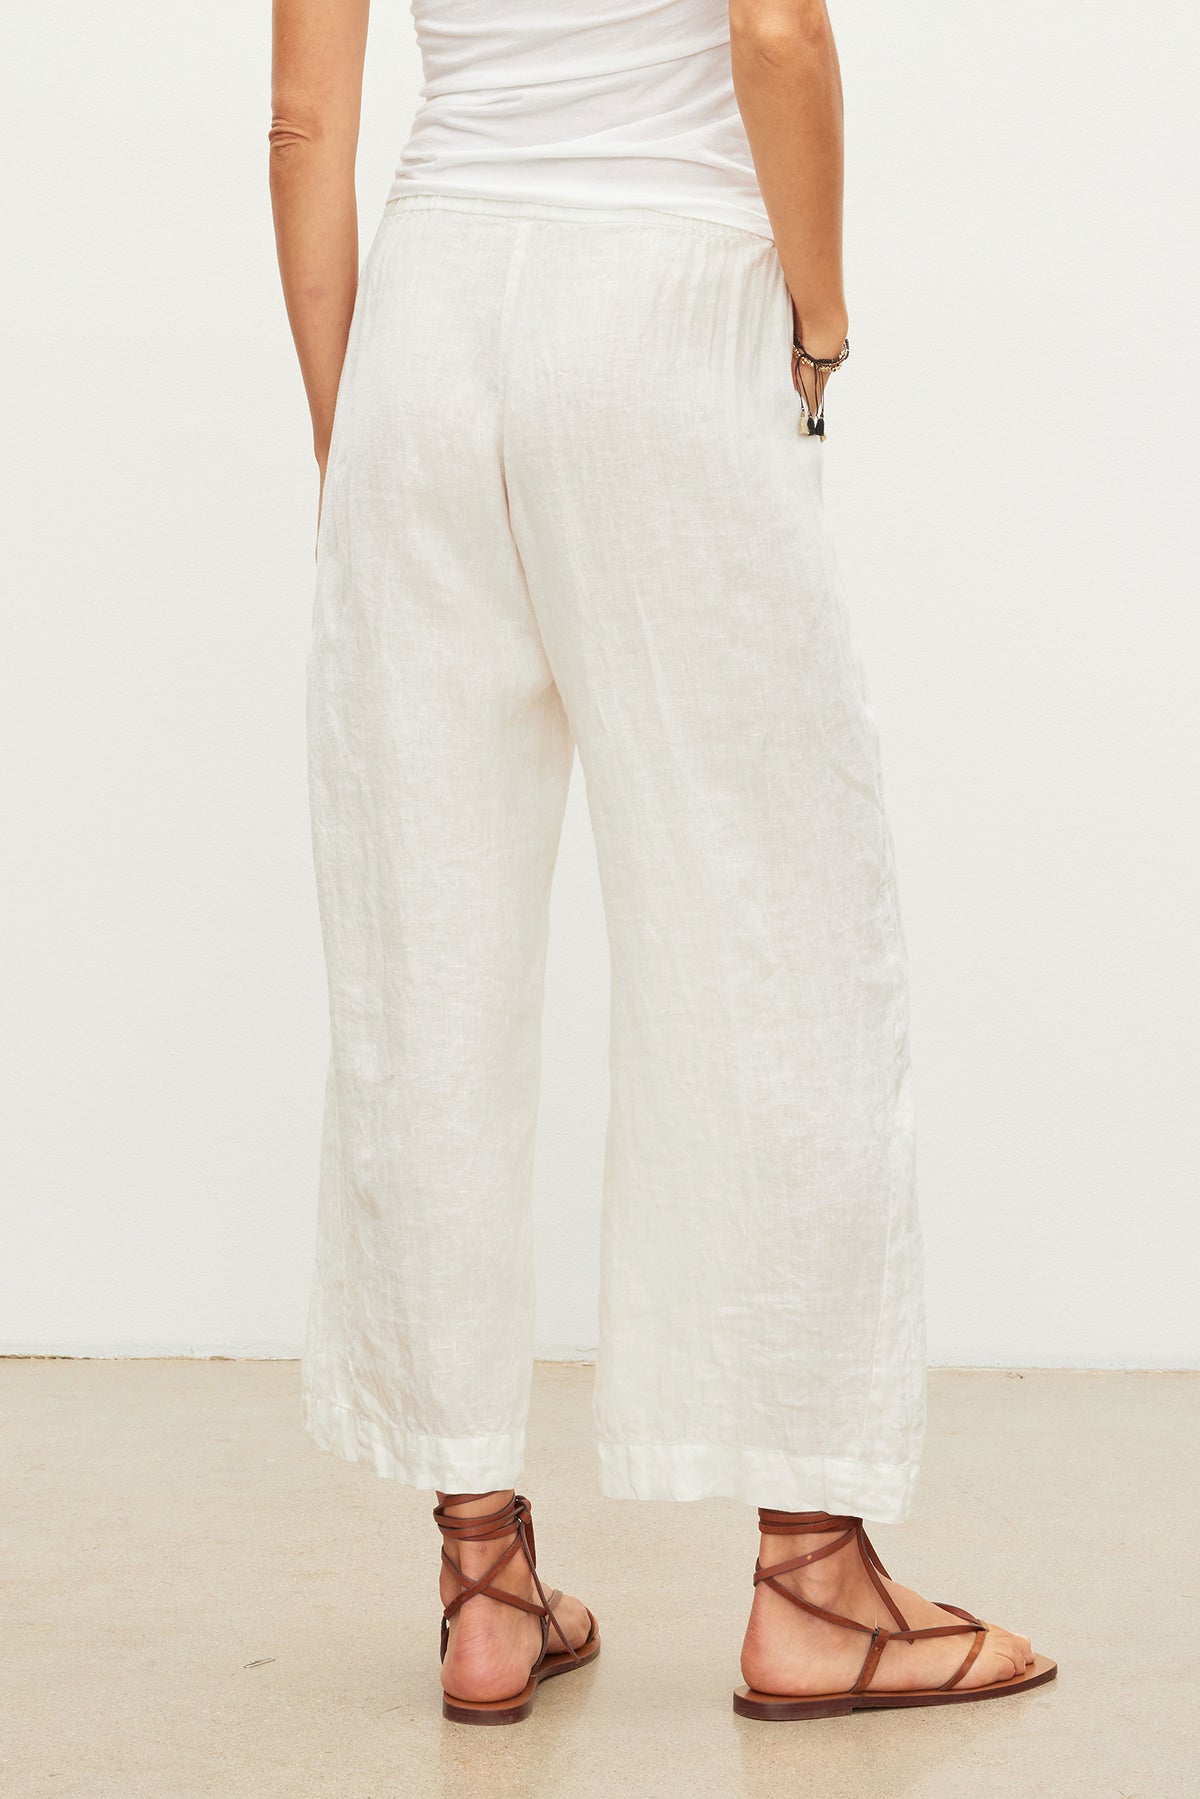   The perfect lightweight LOLA LINEN PANT with an elastic waist designed for comfort by Velvet by Graham & Spencer. 